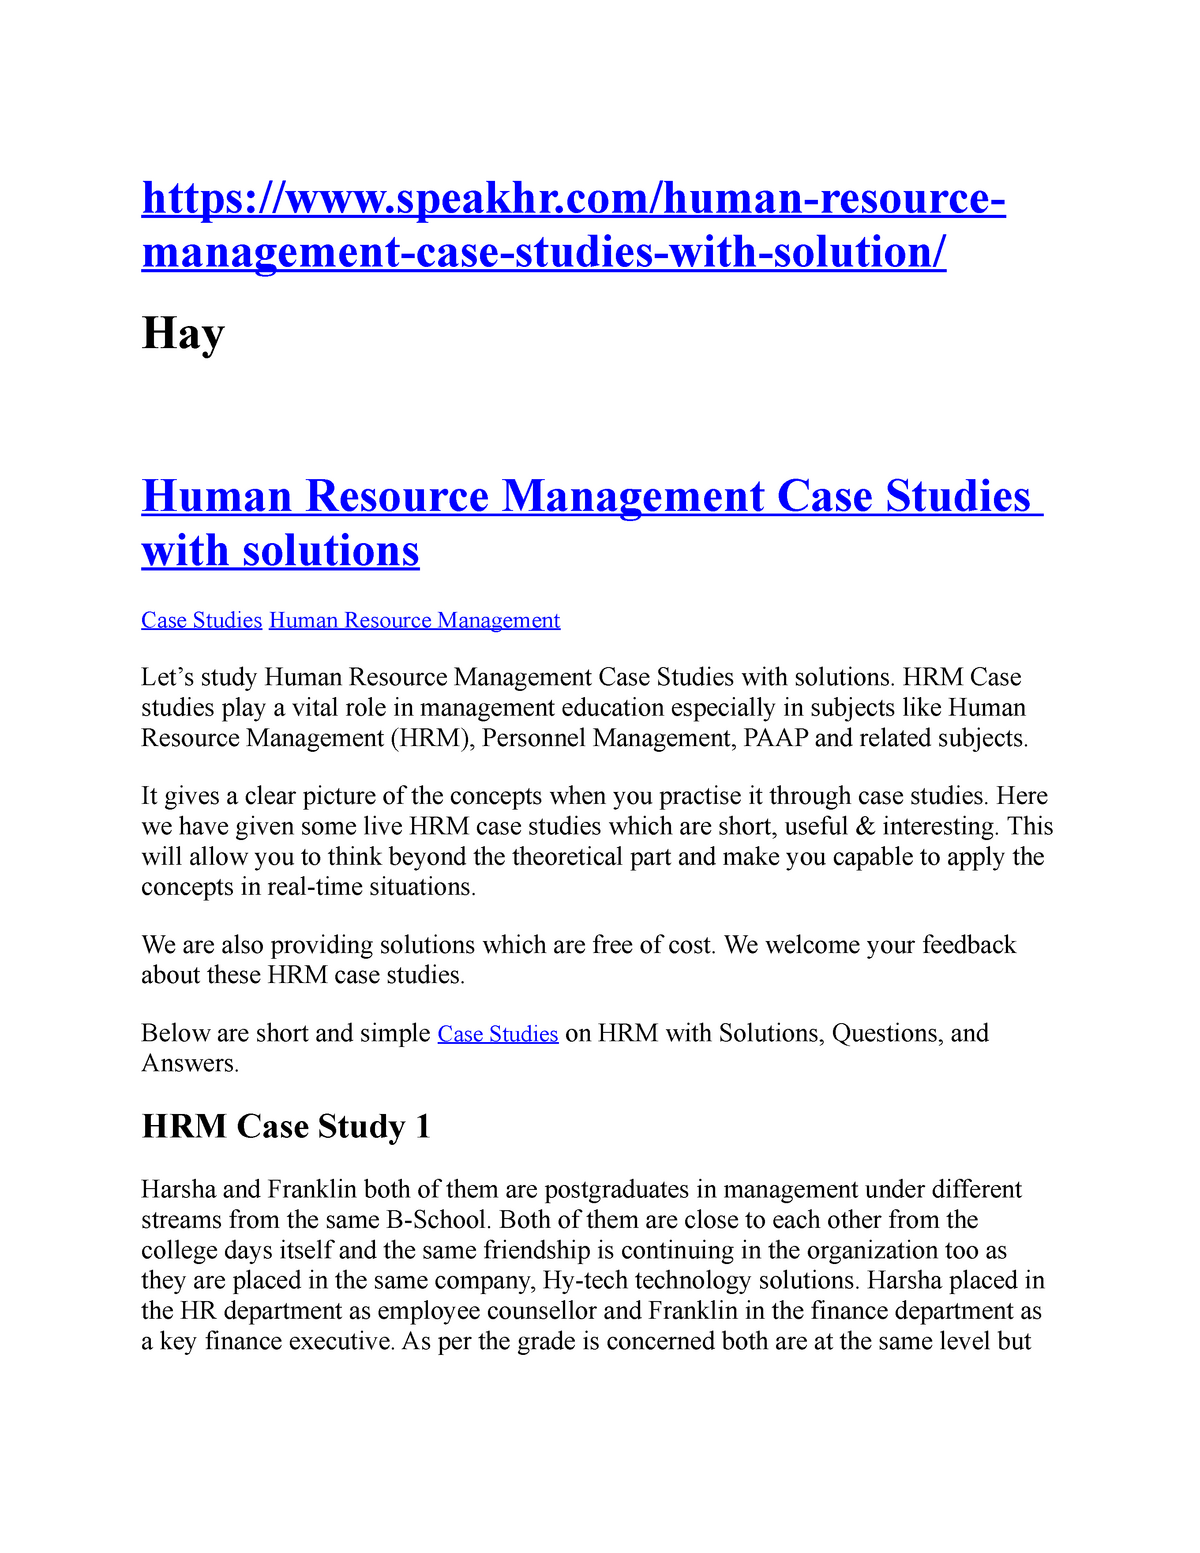 case study in hrm with solutions